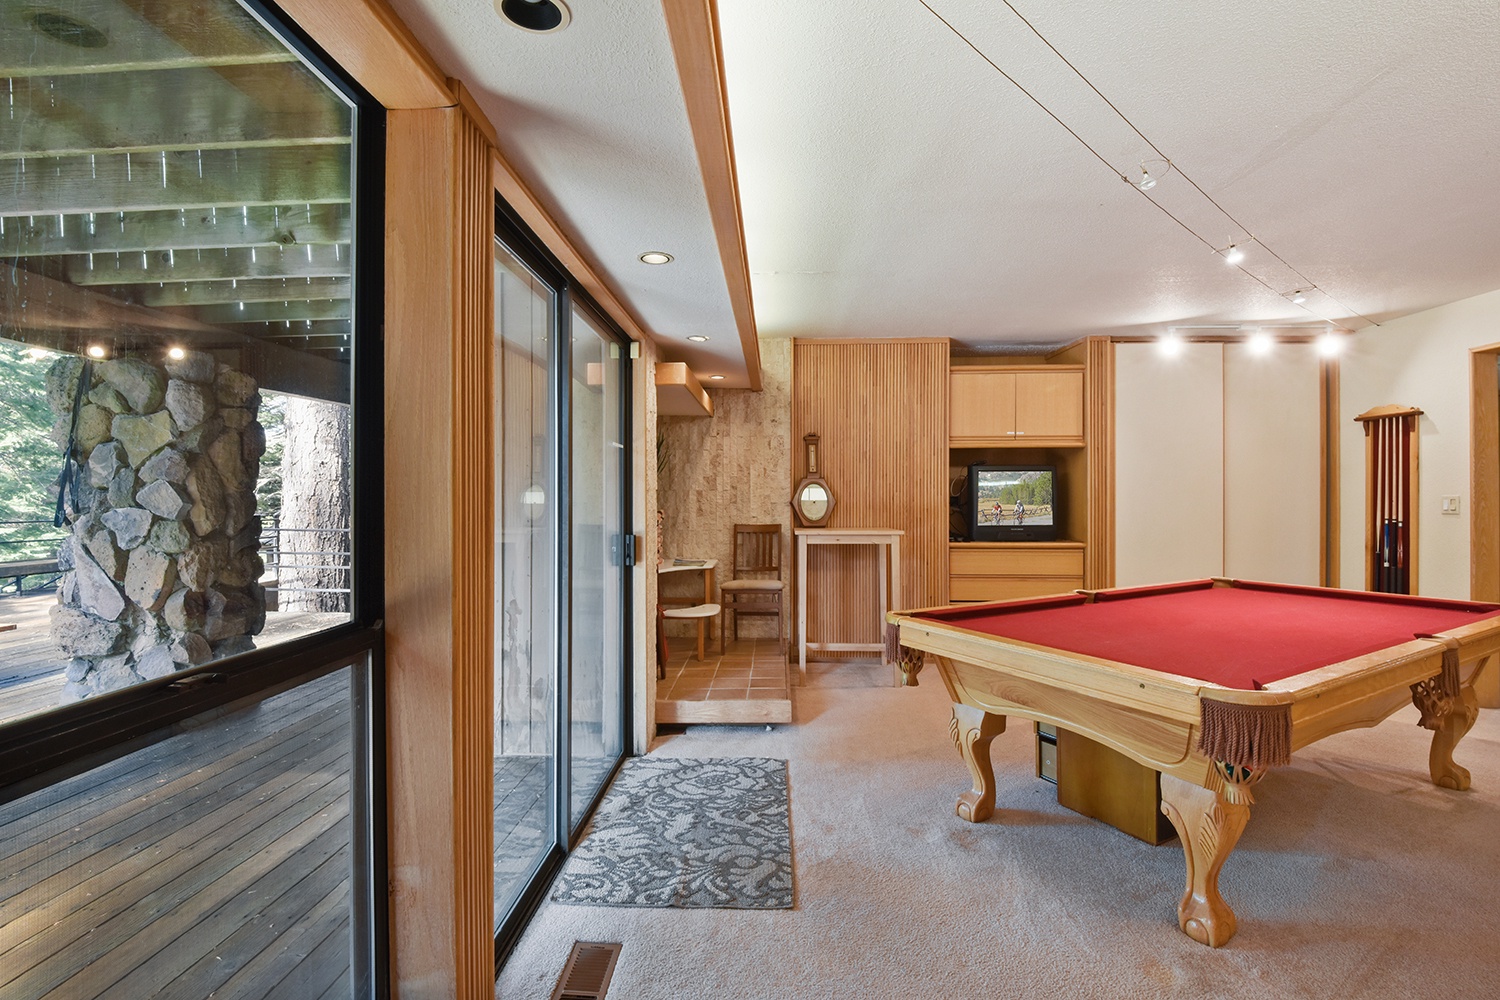 Ground level game room with pool table and TV